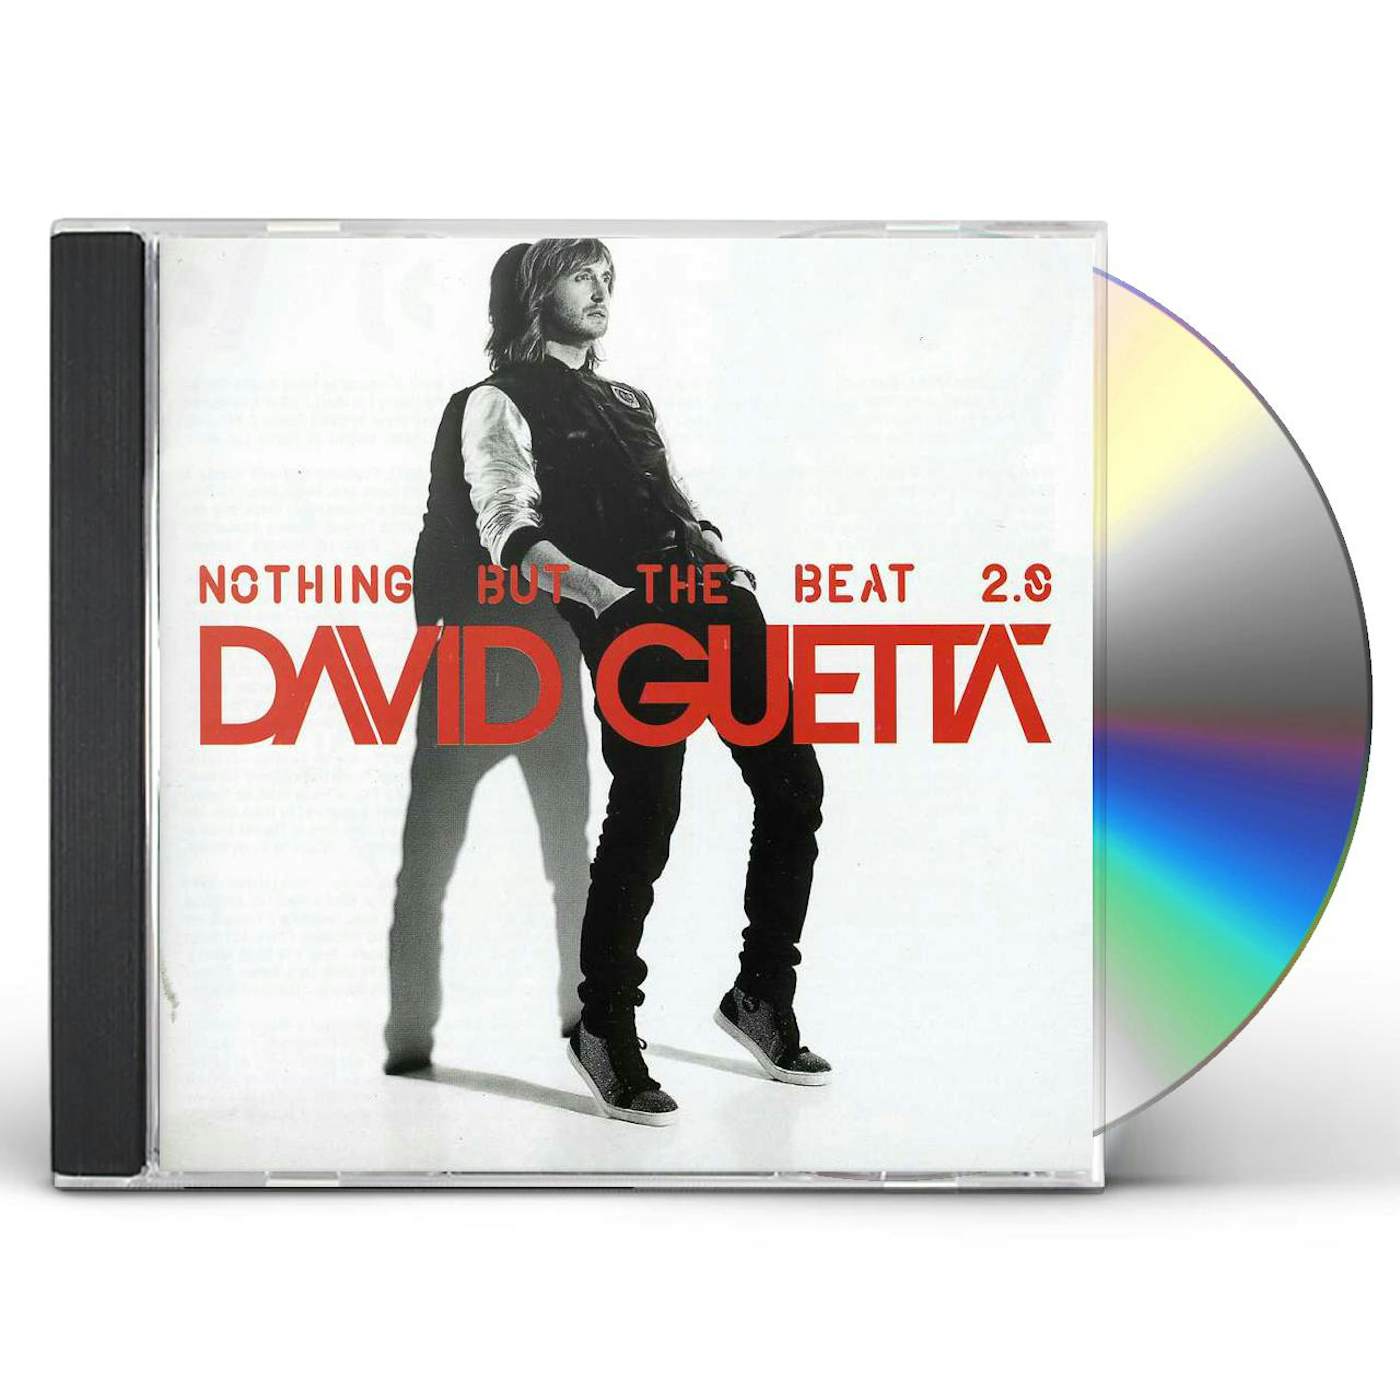 Elevator Umulig appetit David Guetta NOTHING BUT THE BEAT 2.0 CD